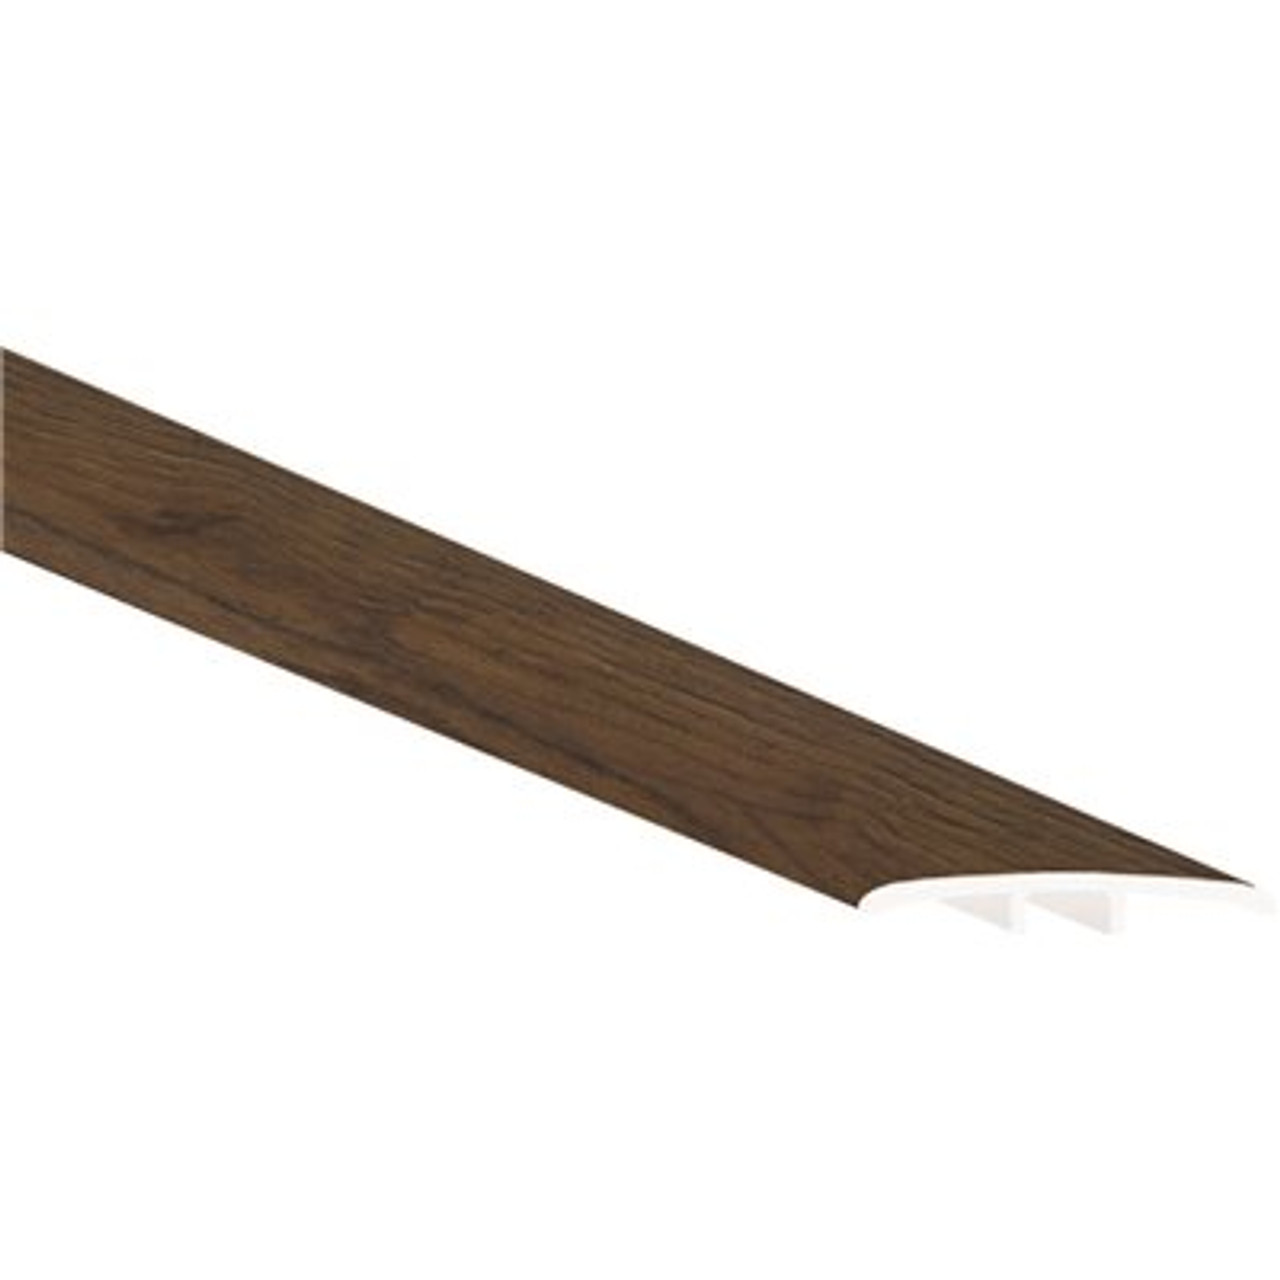 MSI Walnut Drift 1/4 in. Thick x 1-3/4 in. Wide x 94 in. Length Luxury Vinyl T-Molding Large